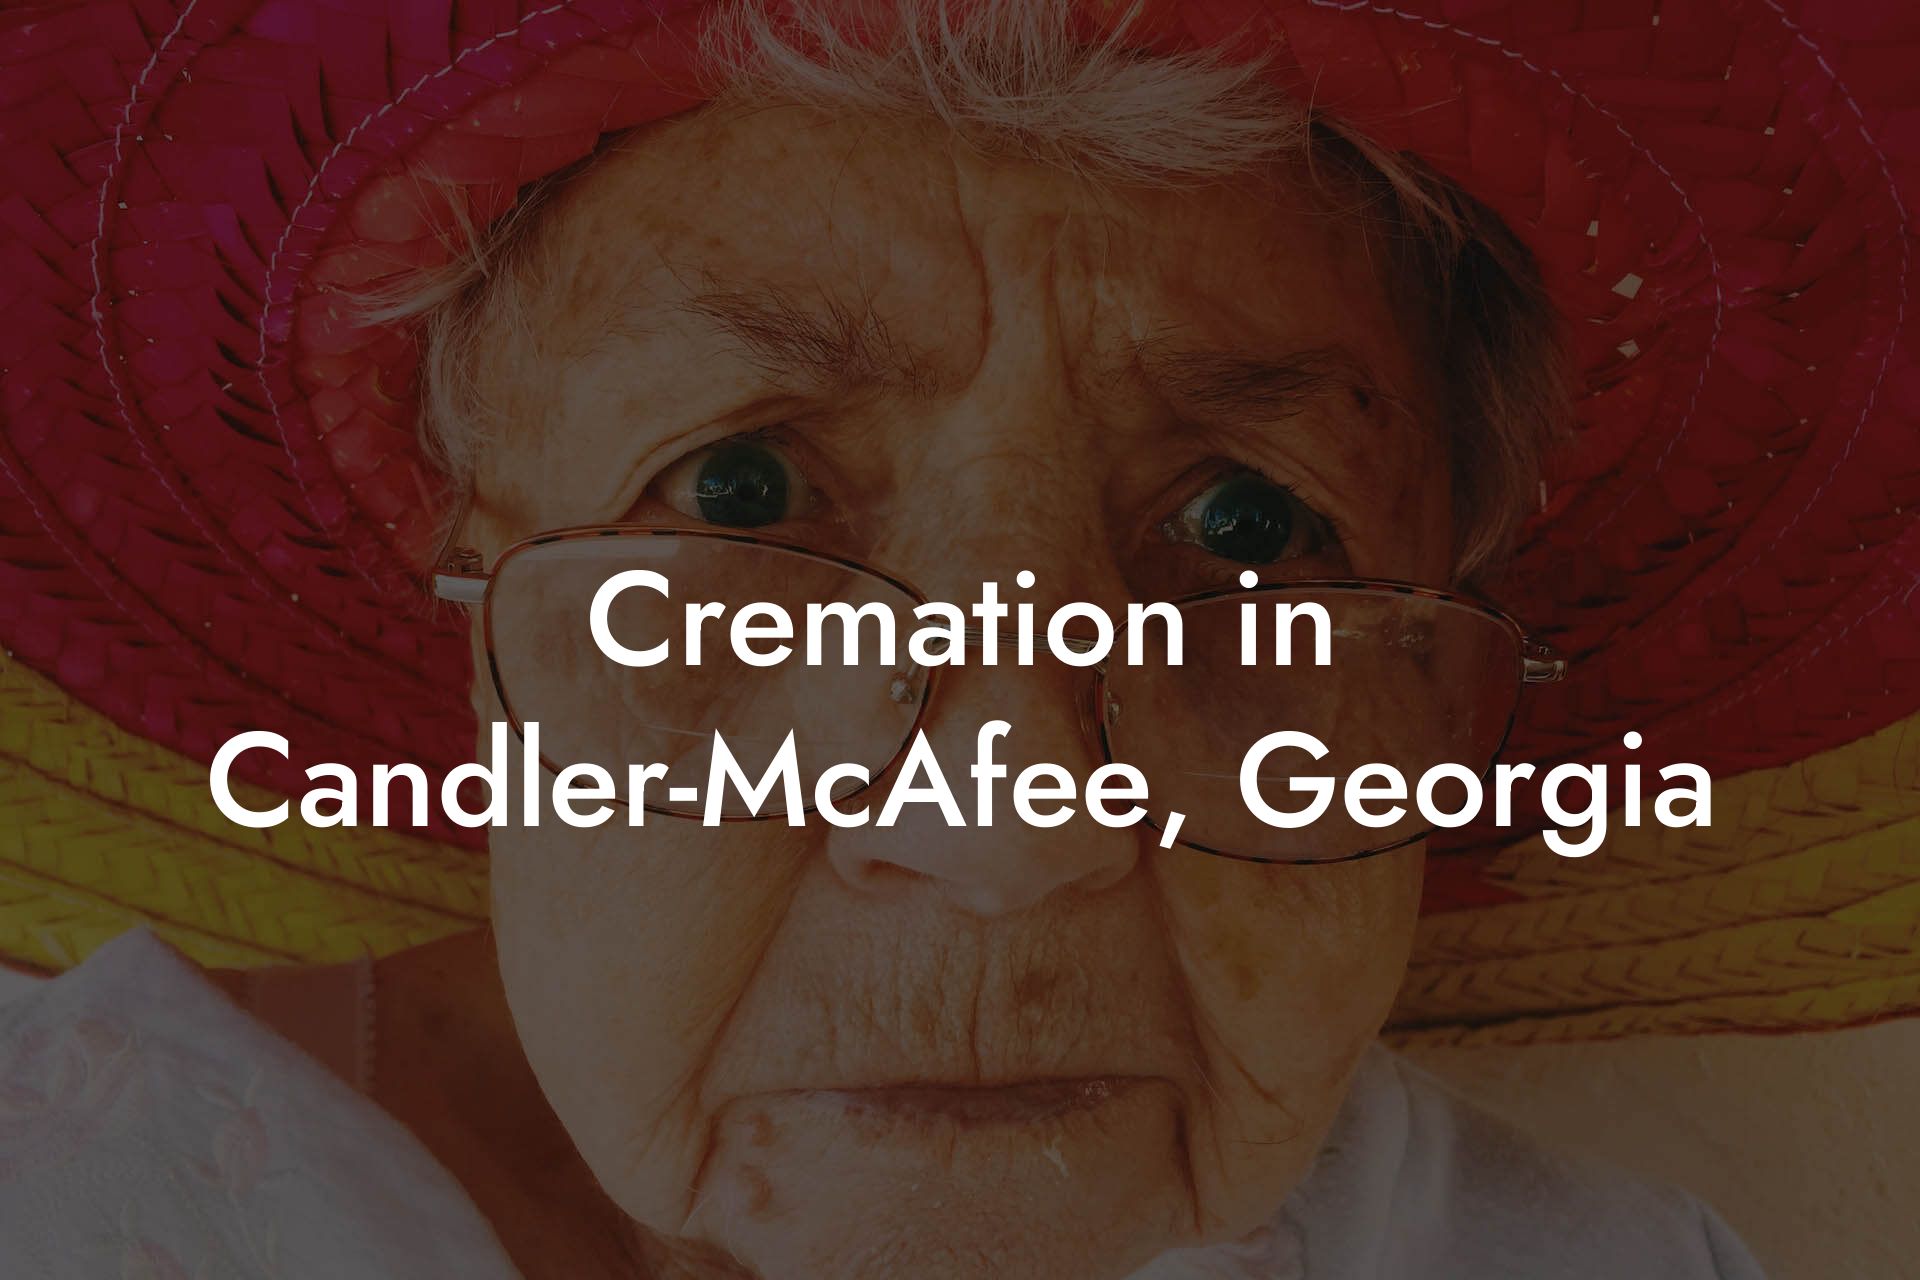 Cremation in Candler-McAfee, Georgia